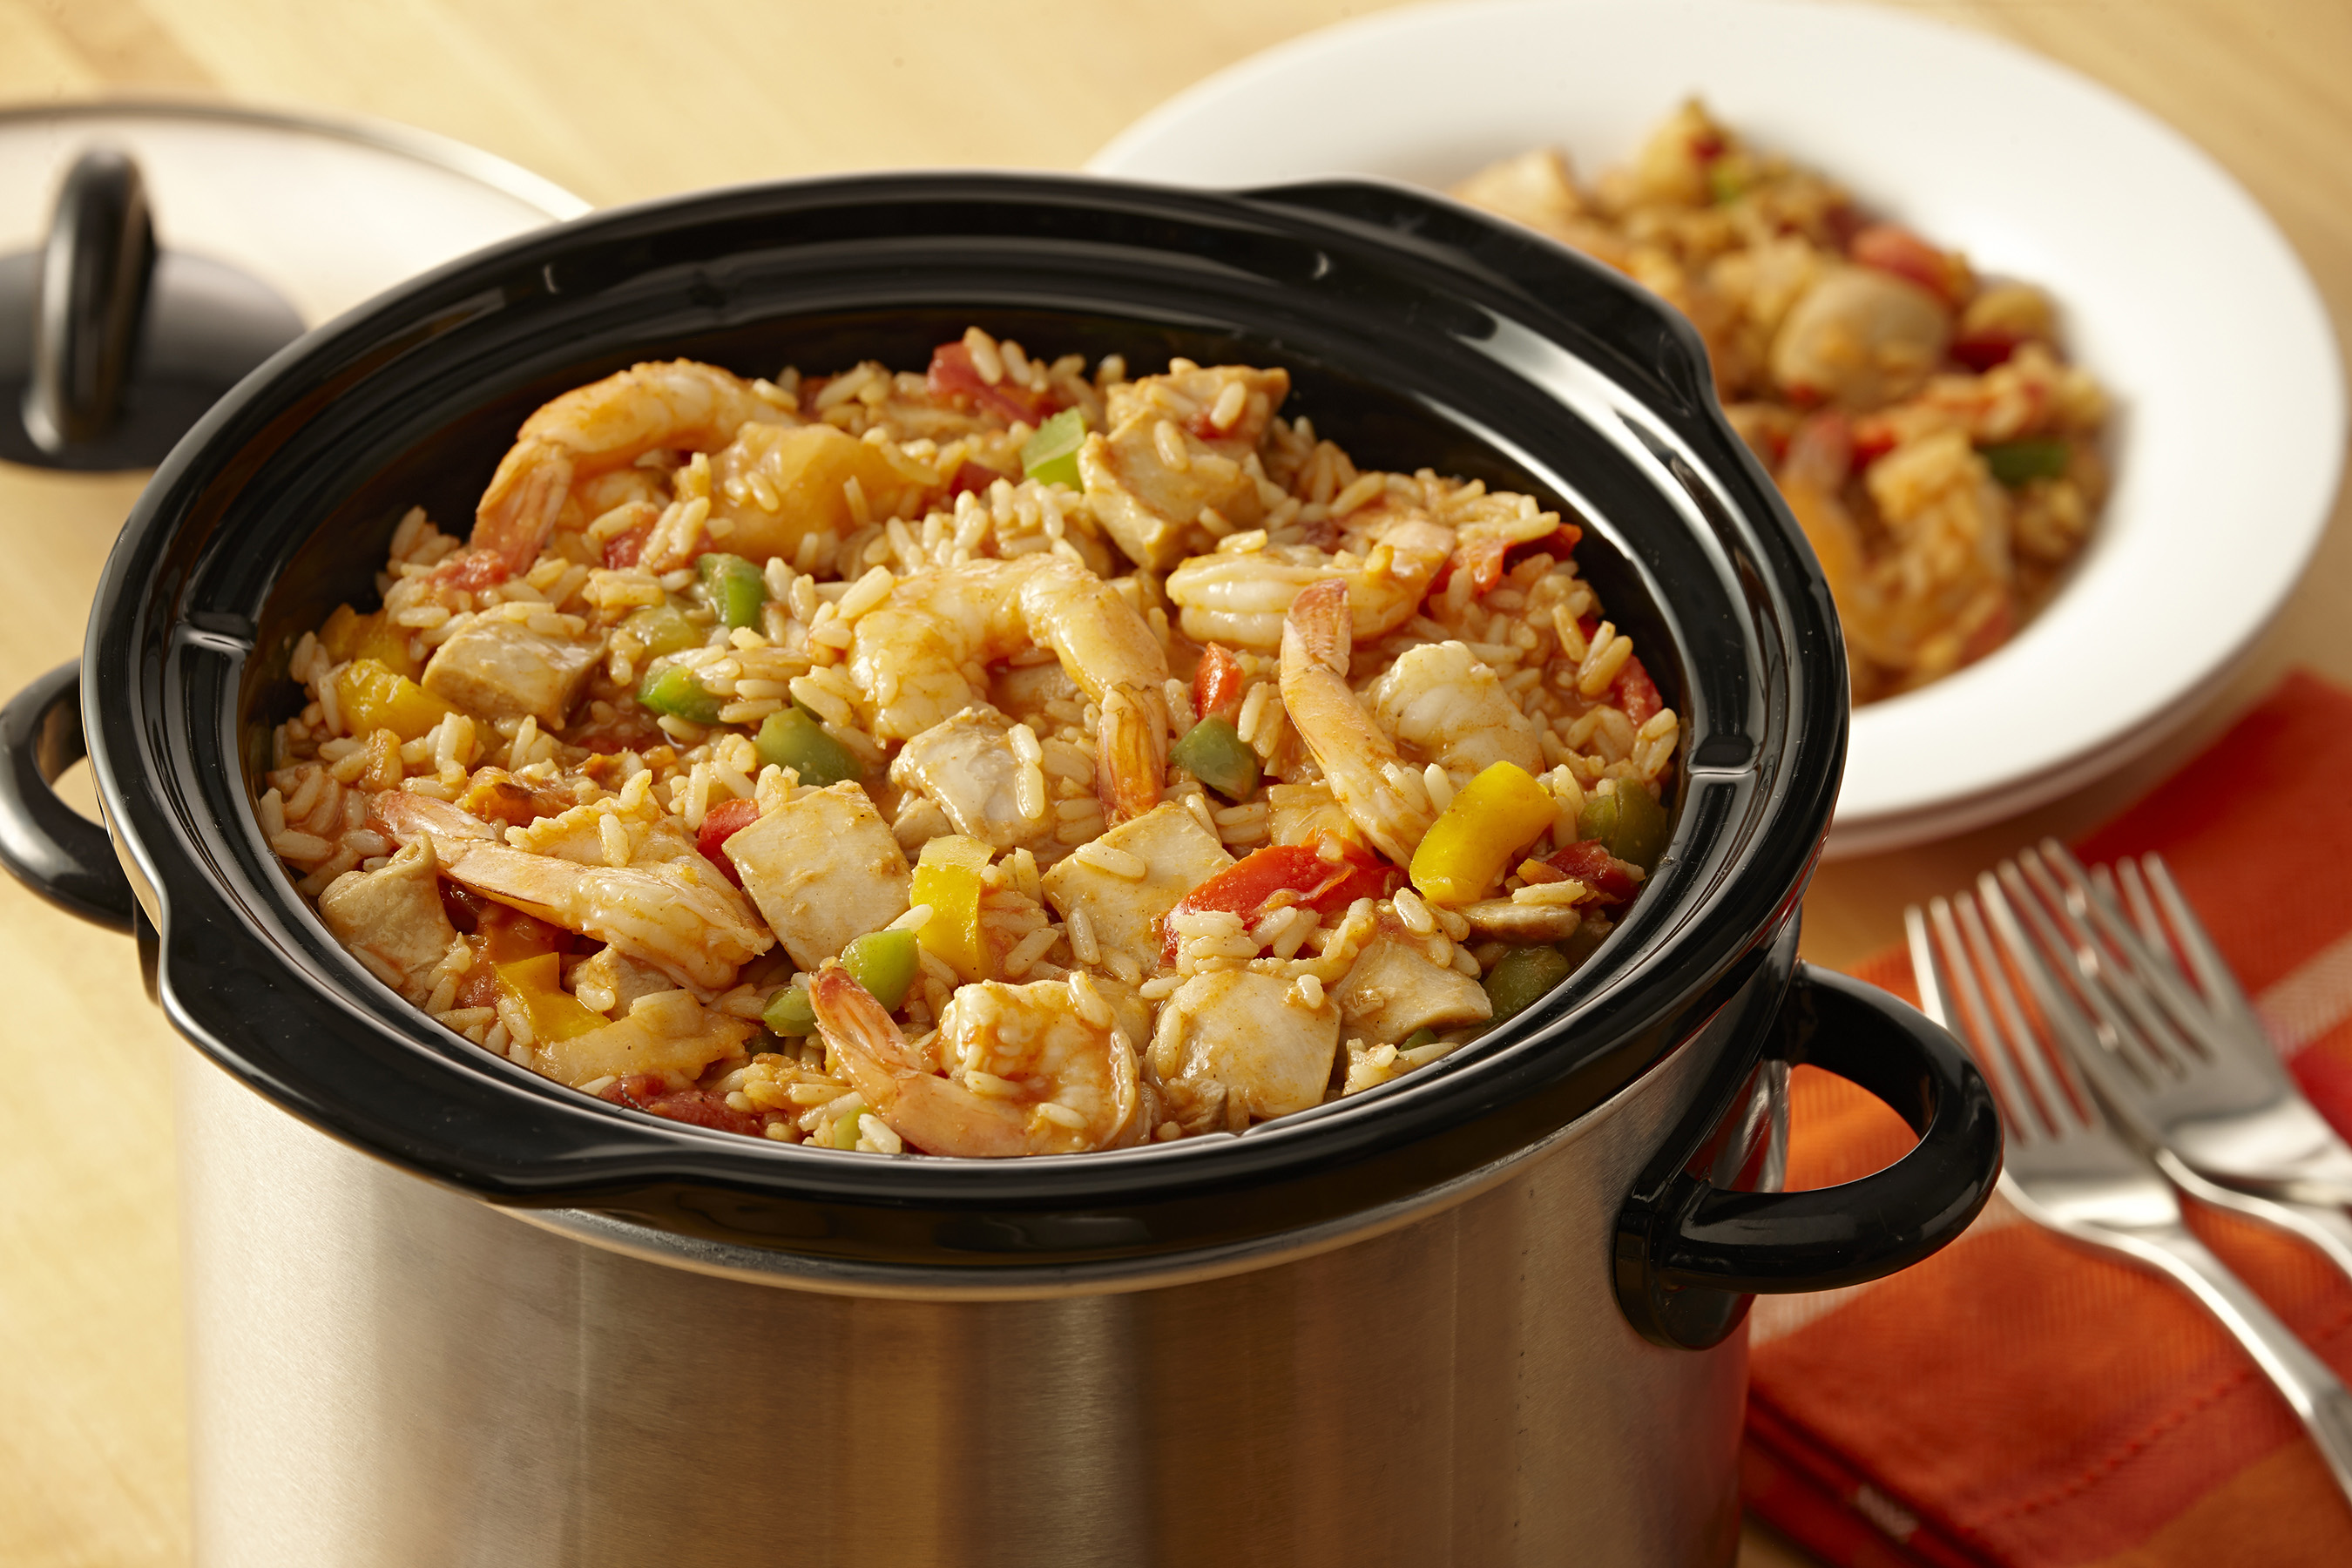 Slow Cooker Chicken and Shrimp Jambalaya: Cook up a hands-off batch of this New Orleans favorite with Zatarain’s Jambalaya Mix, chicken, shrimp, diced tomatoes, and frozen peppers and onions--the perfect recipe for a weeknight family meal or entertaining a crowd.